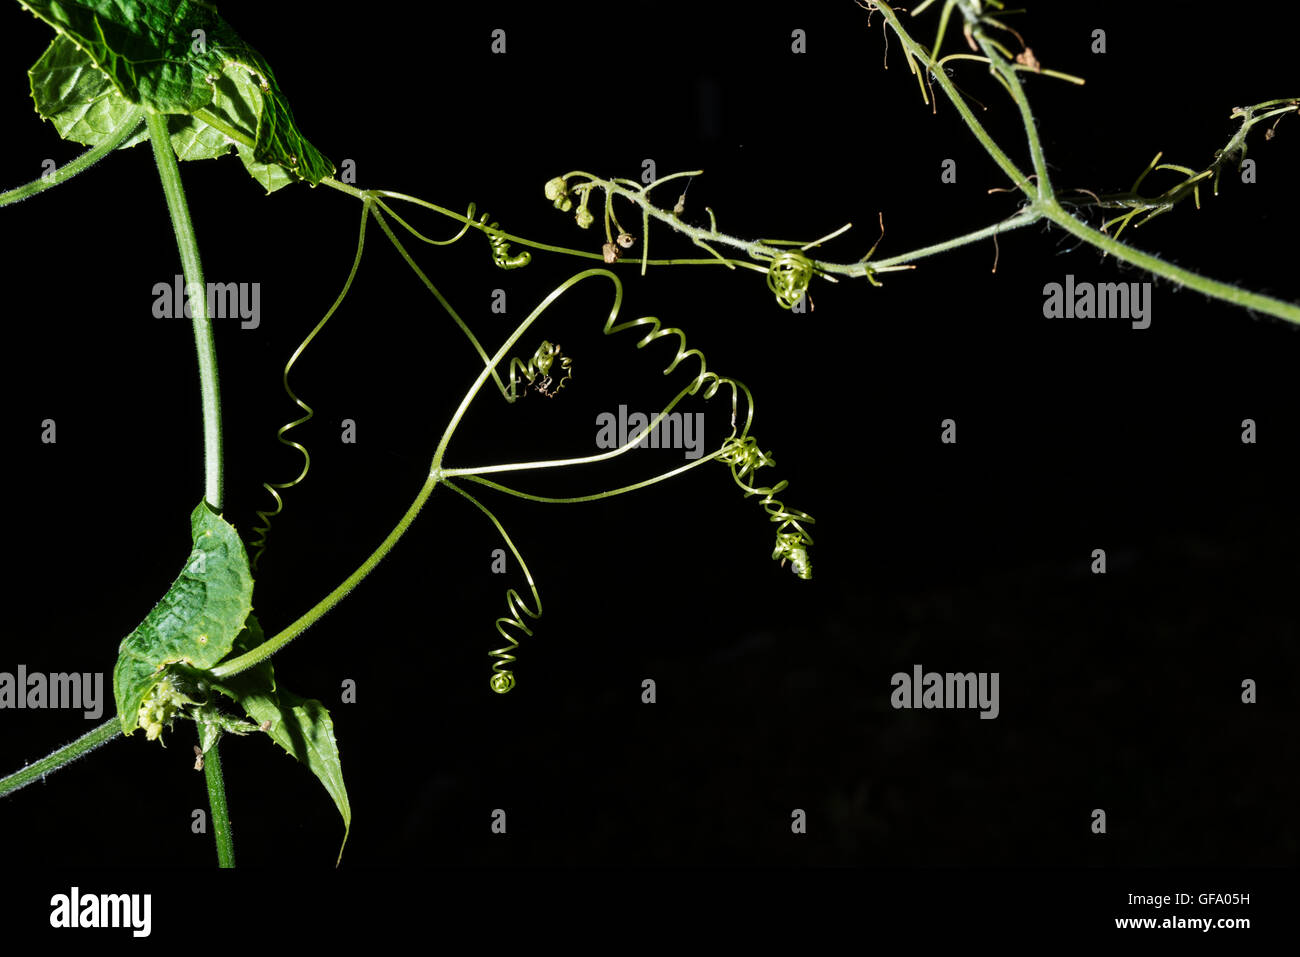 Plants with many tendrils that are taken on black background Stock Photo